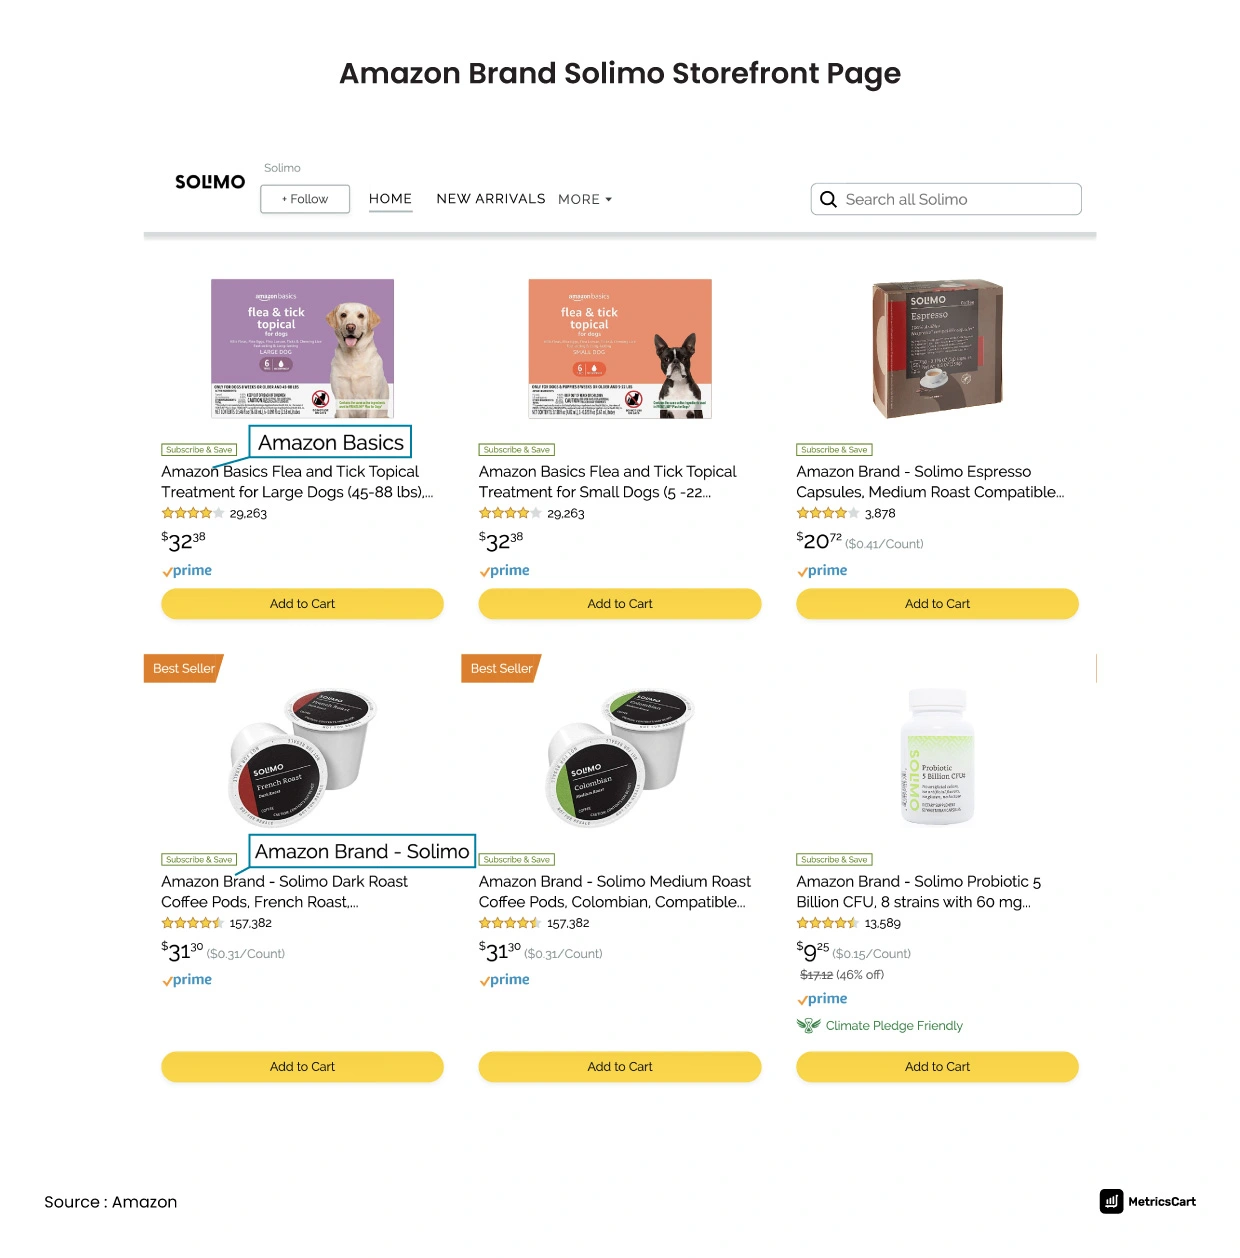 amazon private brand solimo storefront page